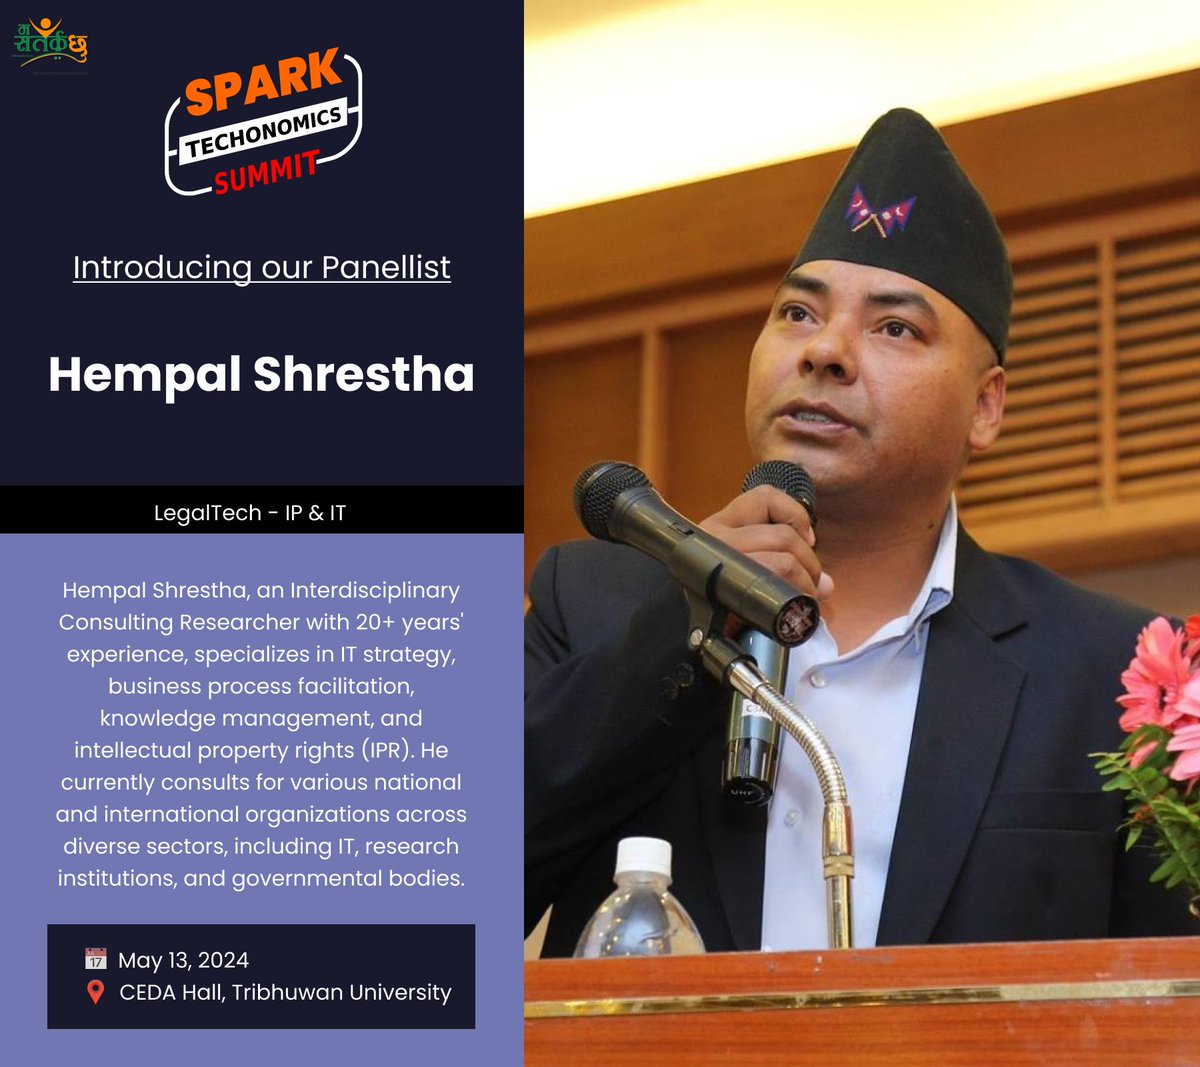 Excited to have Hempal Shrestha join us at Spark Techonomics Summit! Legal tech & knowledge management specialist. #TechonomicsSummit Participation Registration Form: bit.ly/sts-join StartUp Presentation Registration Form: bit.ly/sts-startup